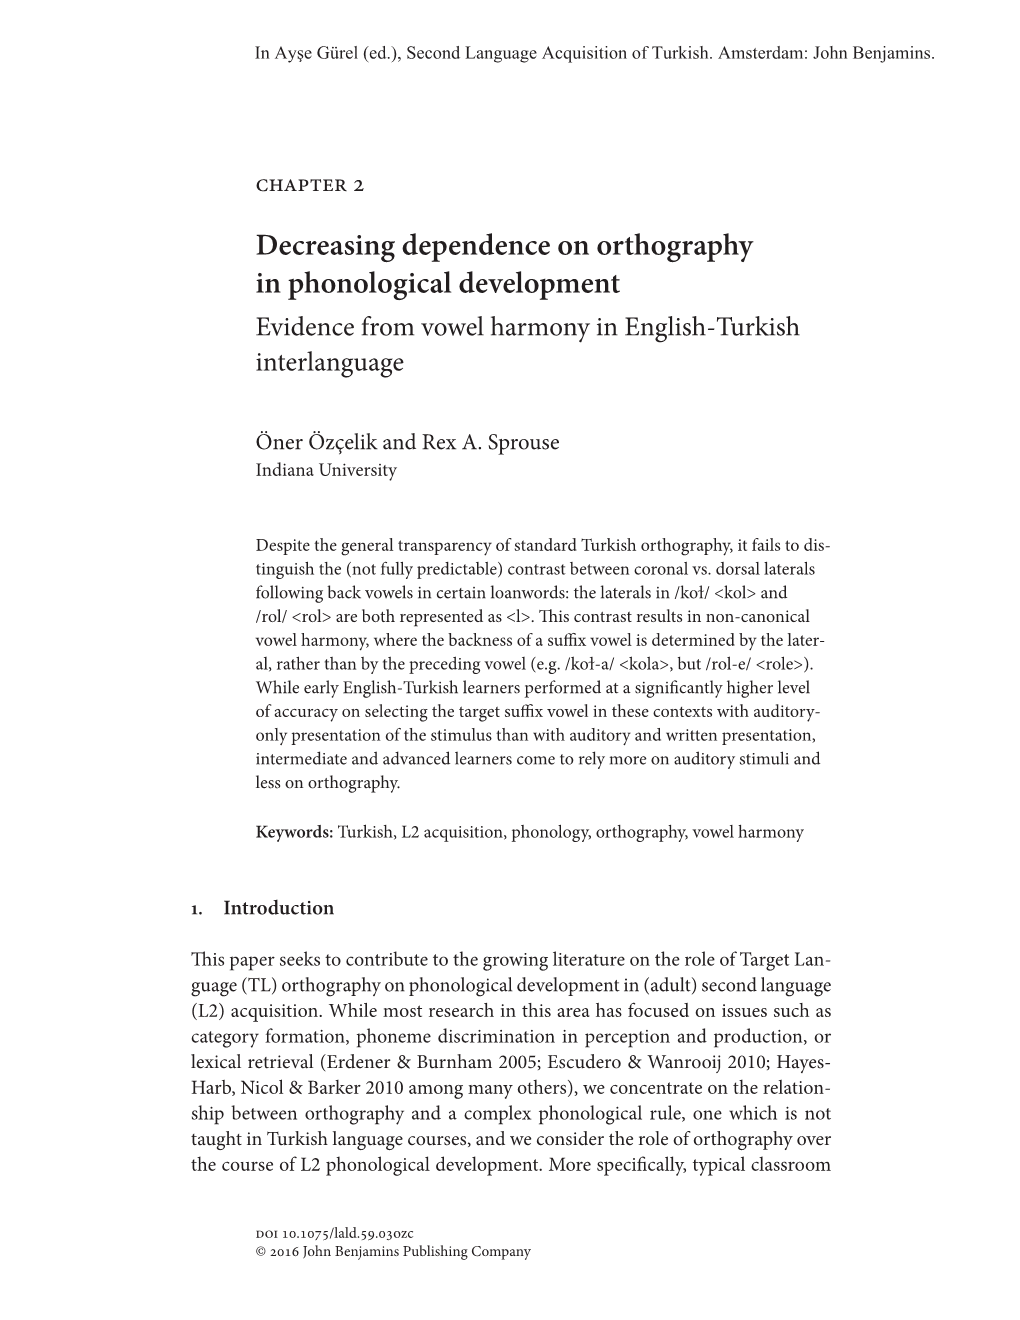 Decreasing Dependence on Orthography in Phonological Development Evidence from Vowel Harmony in English-Turkish Interlanguage